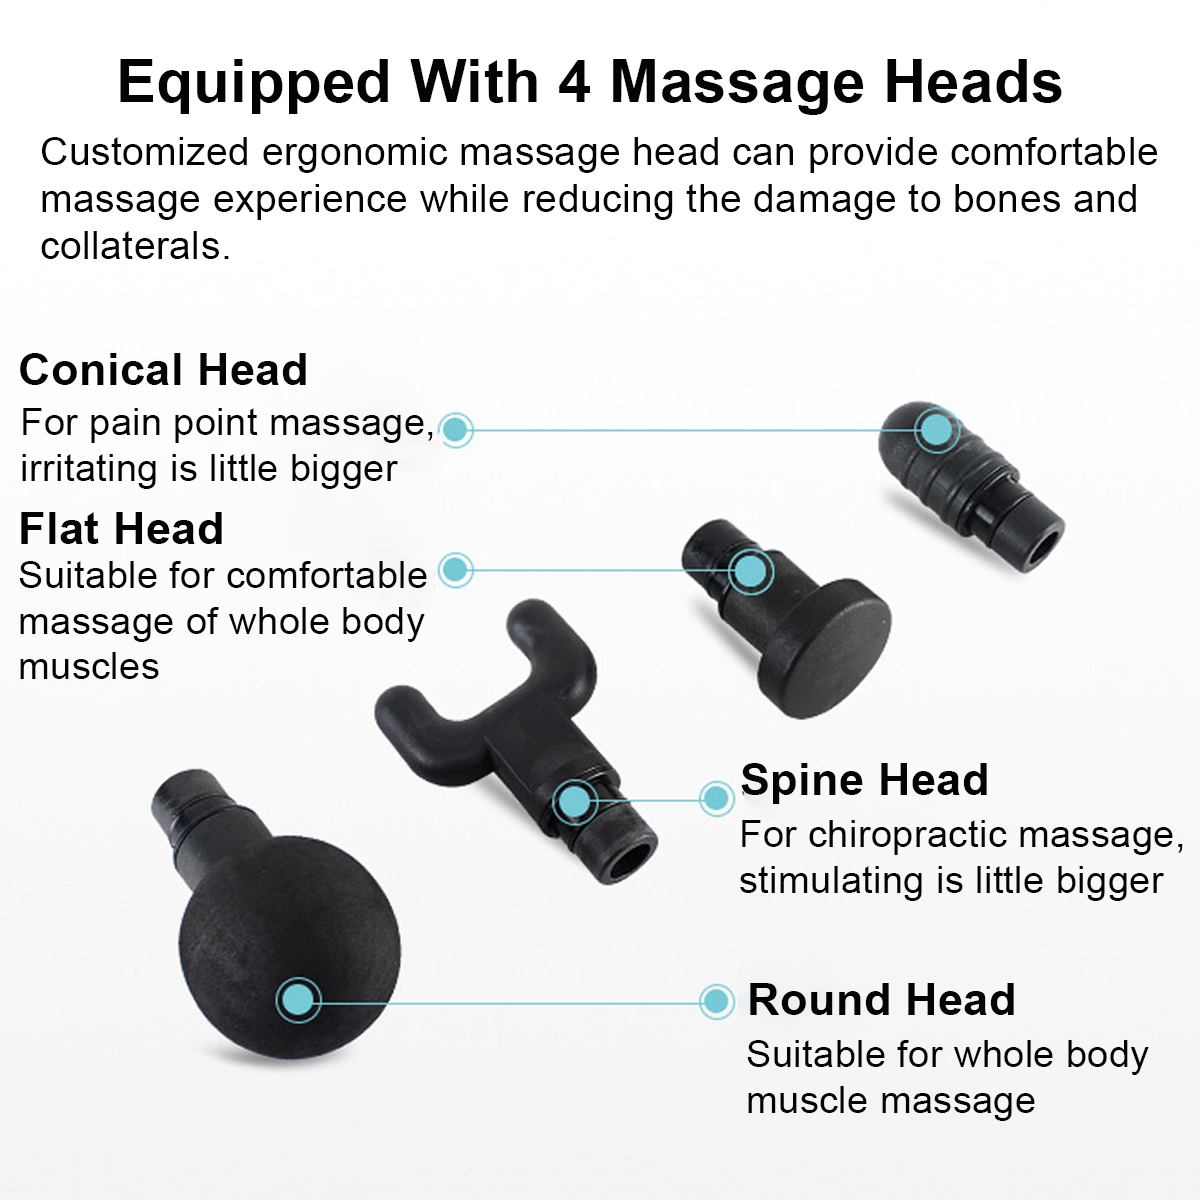 2400-mAh-Percussion-Massage-Deep-Tissue-Electric-Massager-Cordless-Massag-Device-for-Body-Pain-Relie-1536268-9